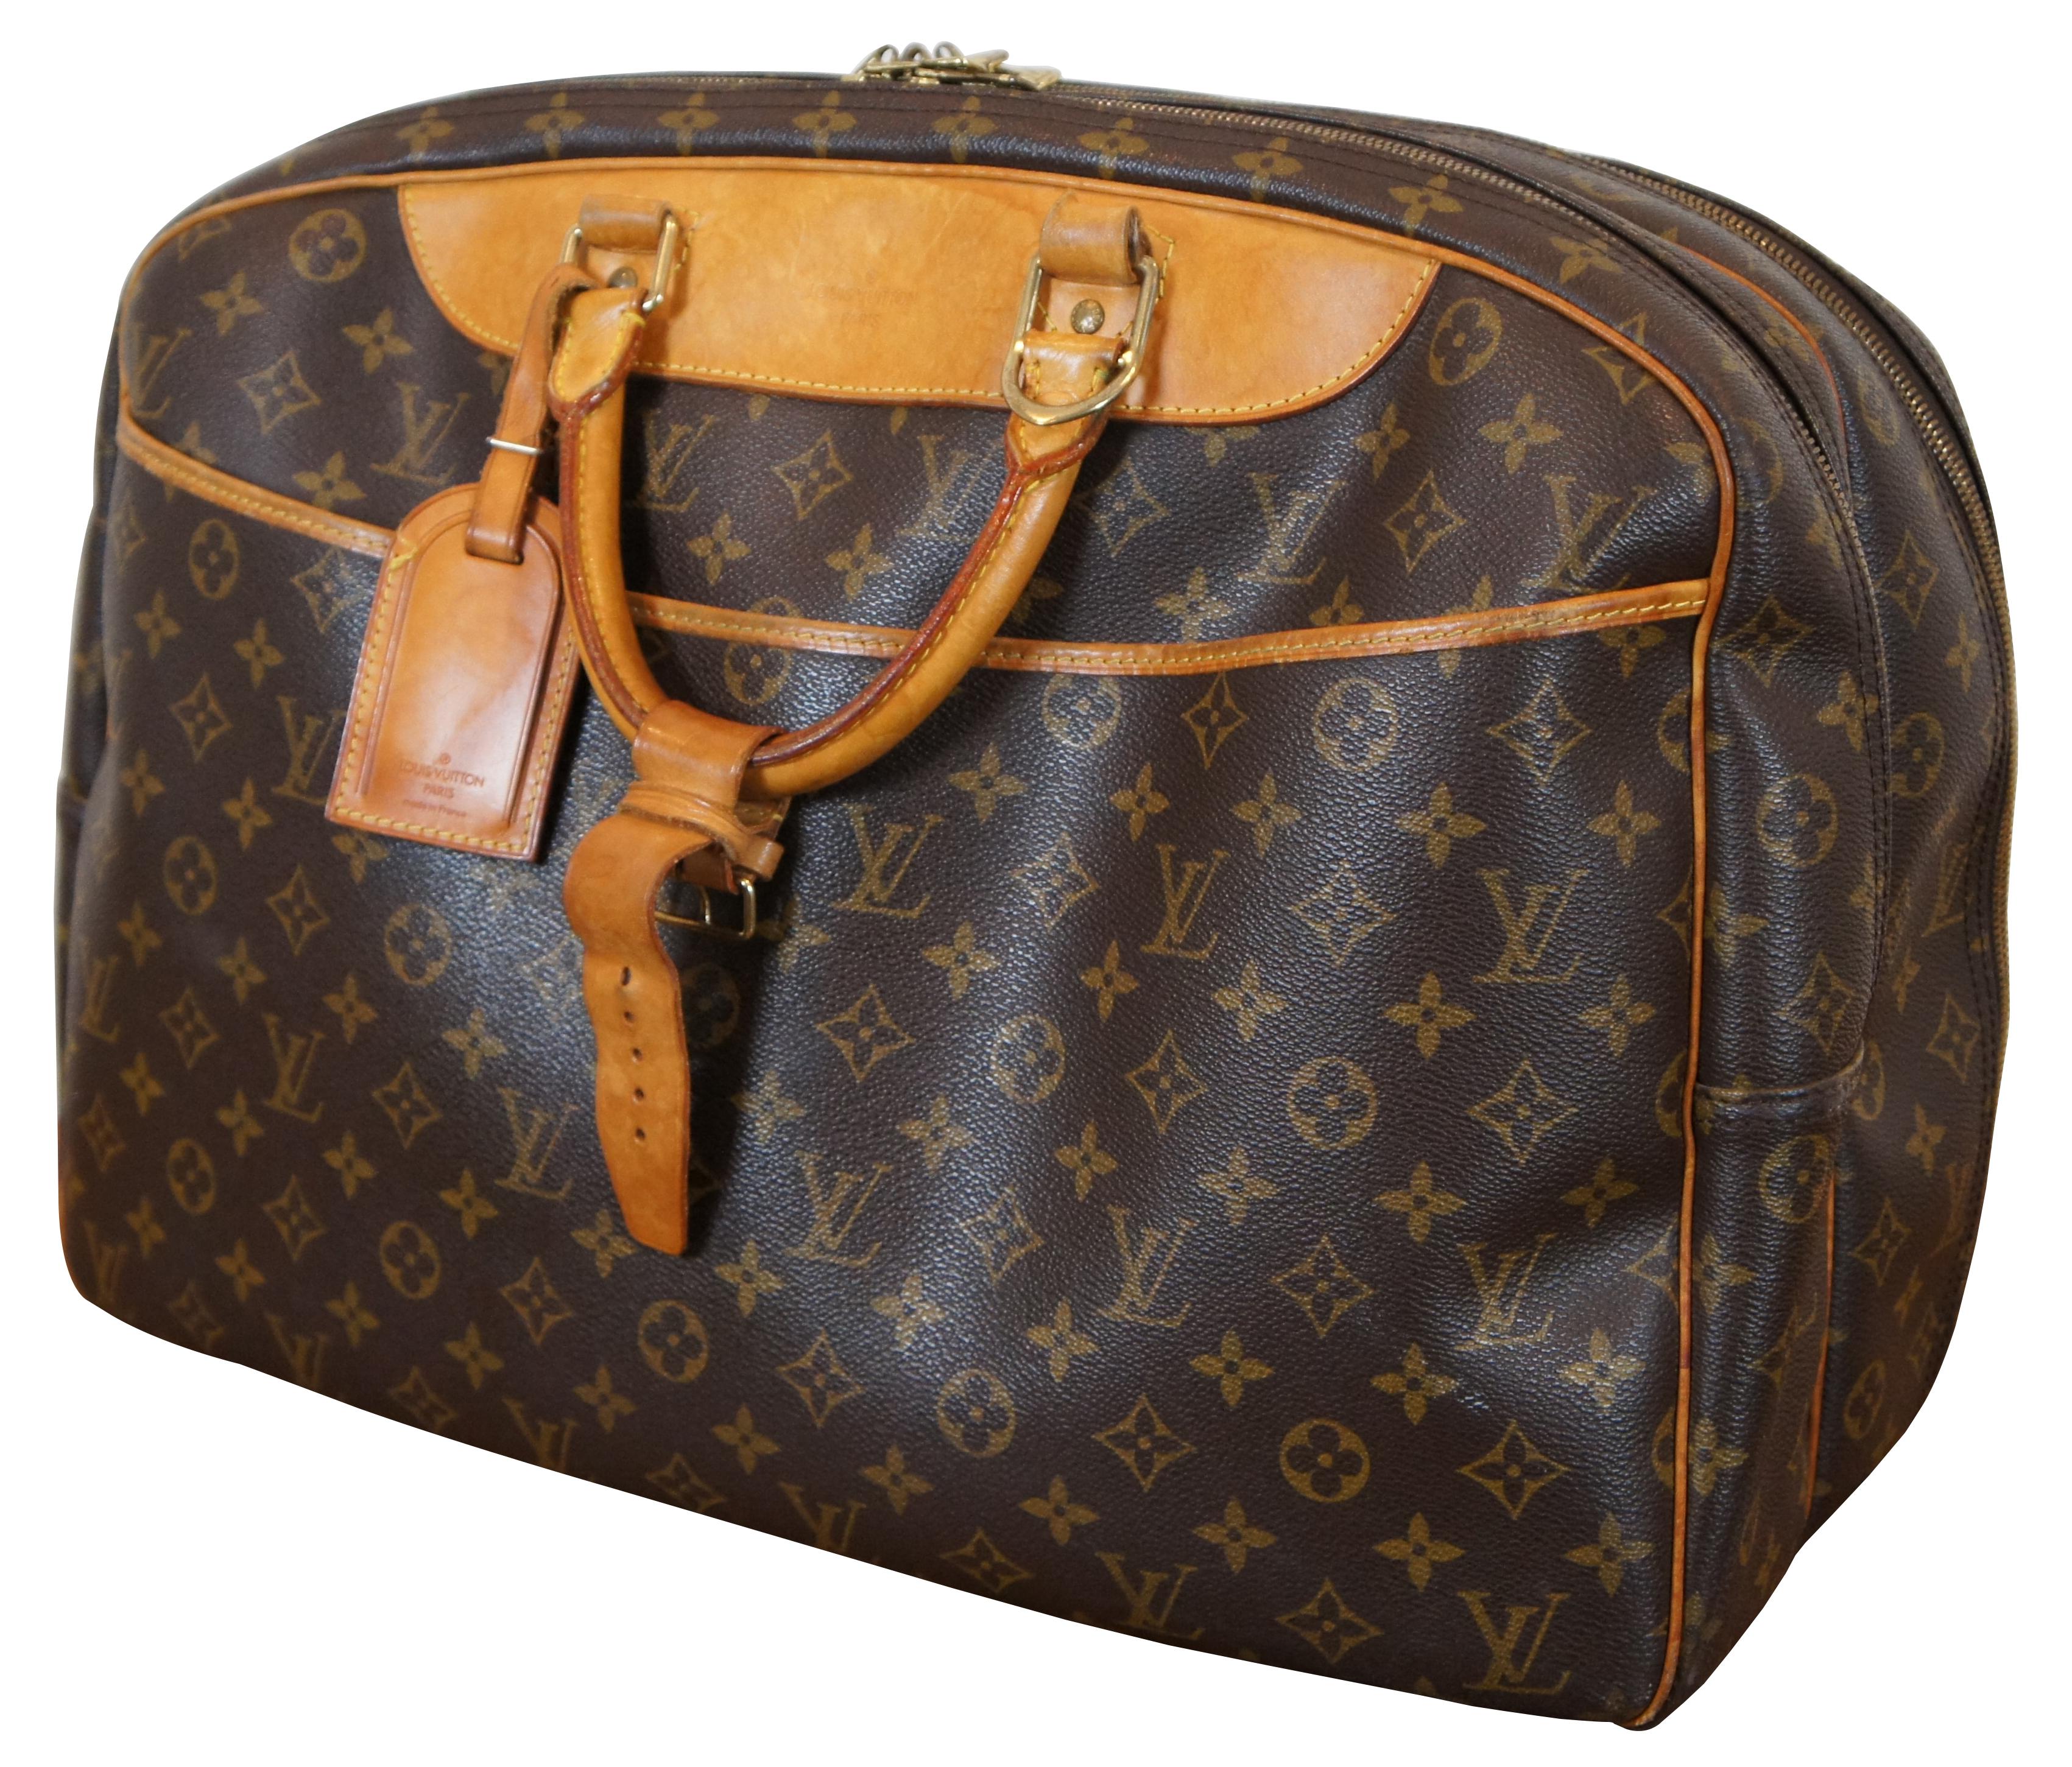 Louis Vuitton Paris Alize 24 Heures Monogram Travel Bag in the classic monogram pattern that features round top handles and gold-toned hardware. It is designed with a convenient front slip compartment. The bag opens up to 2 large compartments, both